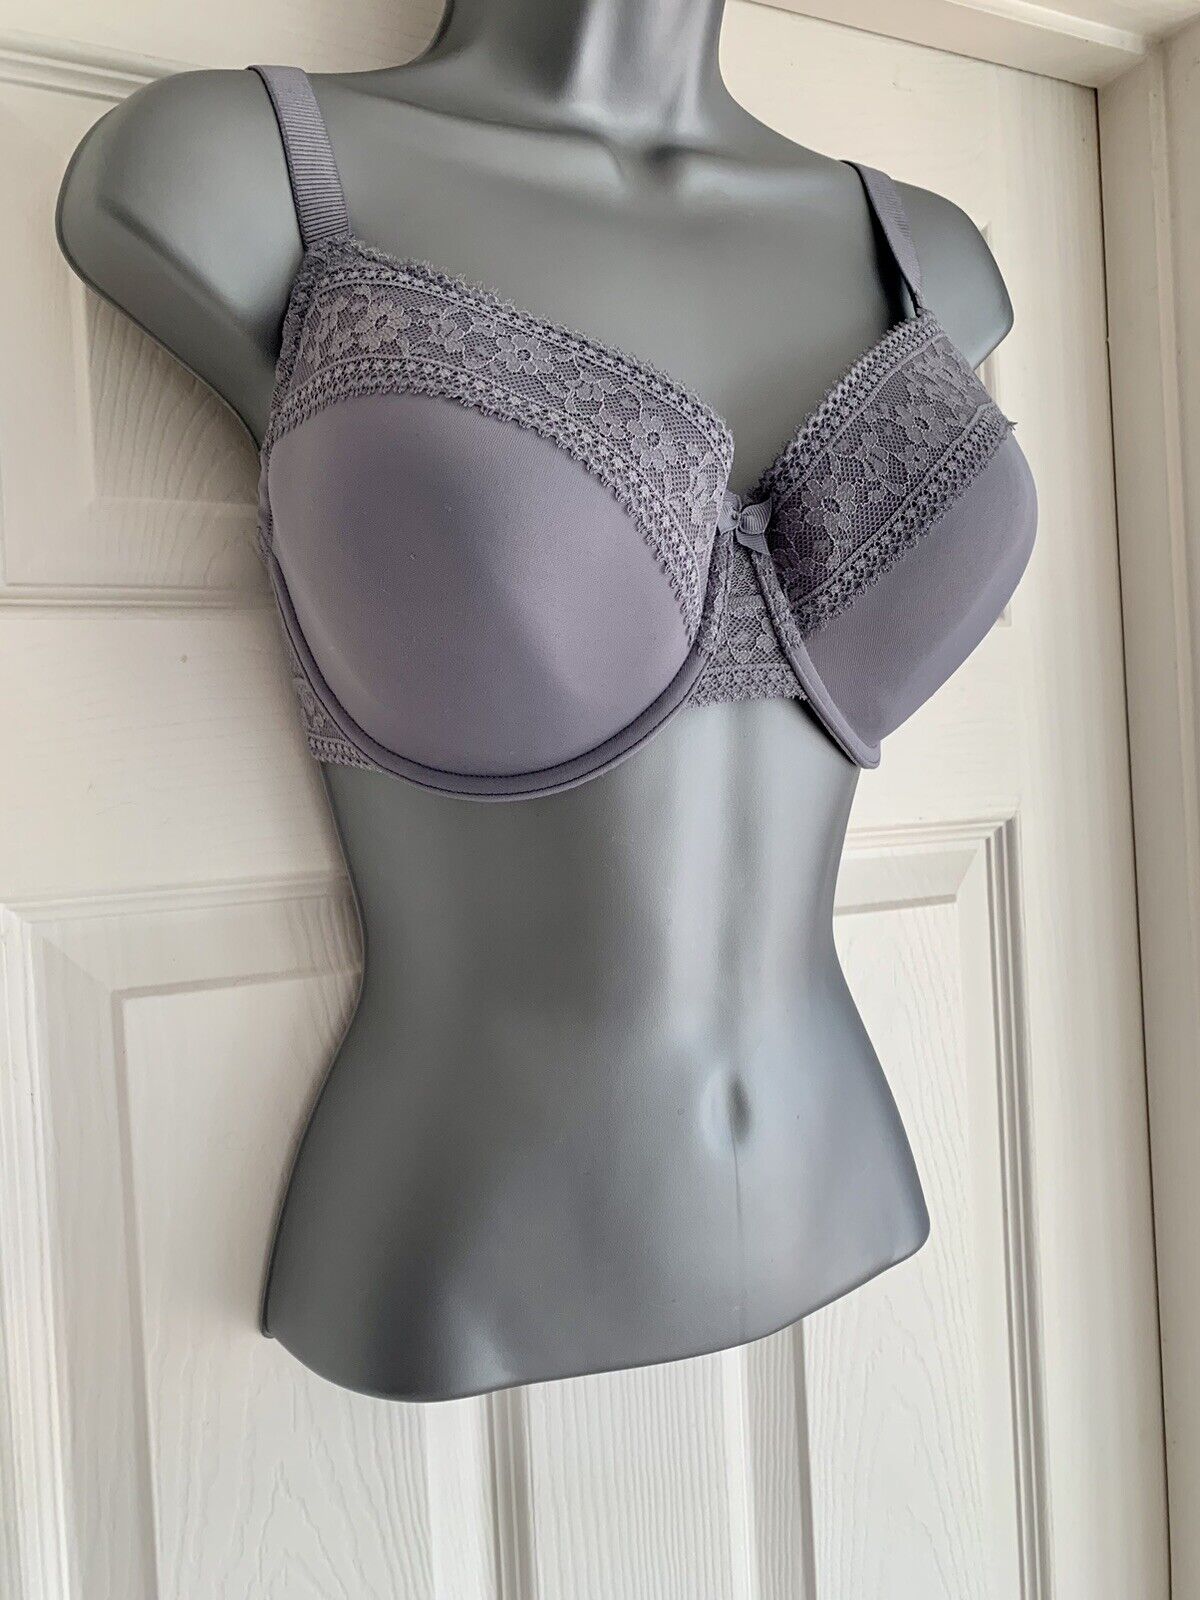 New Ex M&S Total Support Floral Lace Non Padded Full Cup Bra Sizes